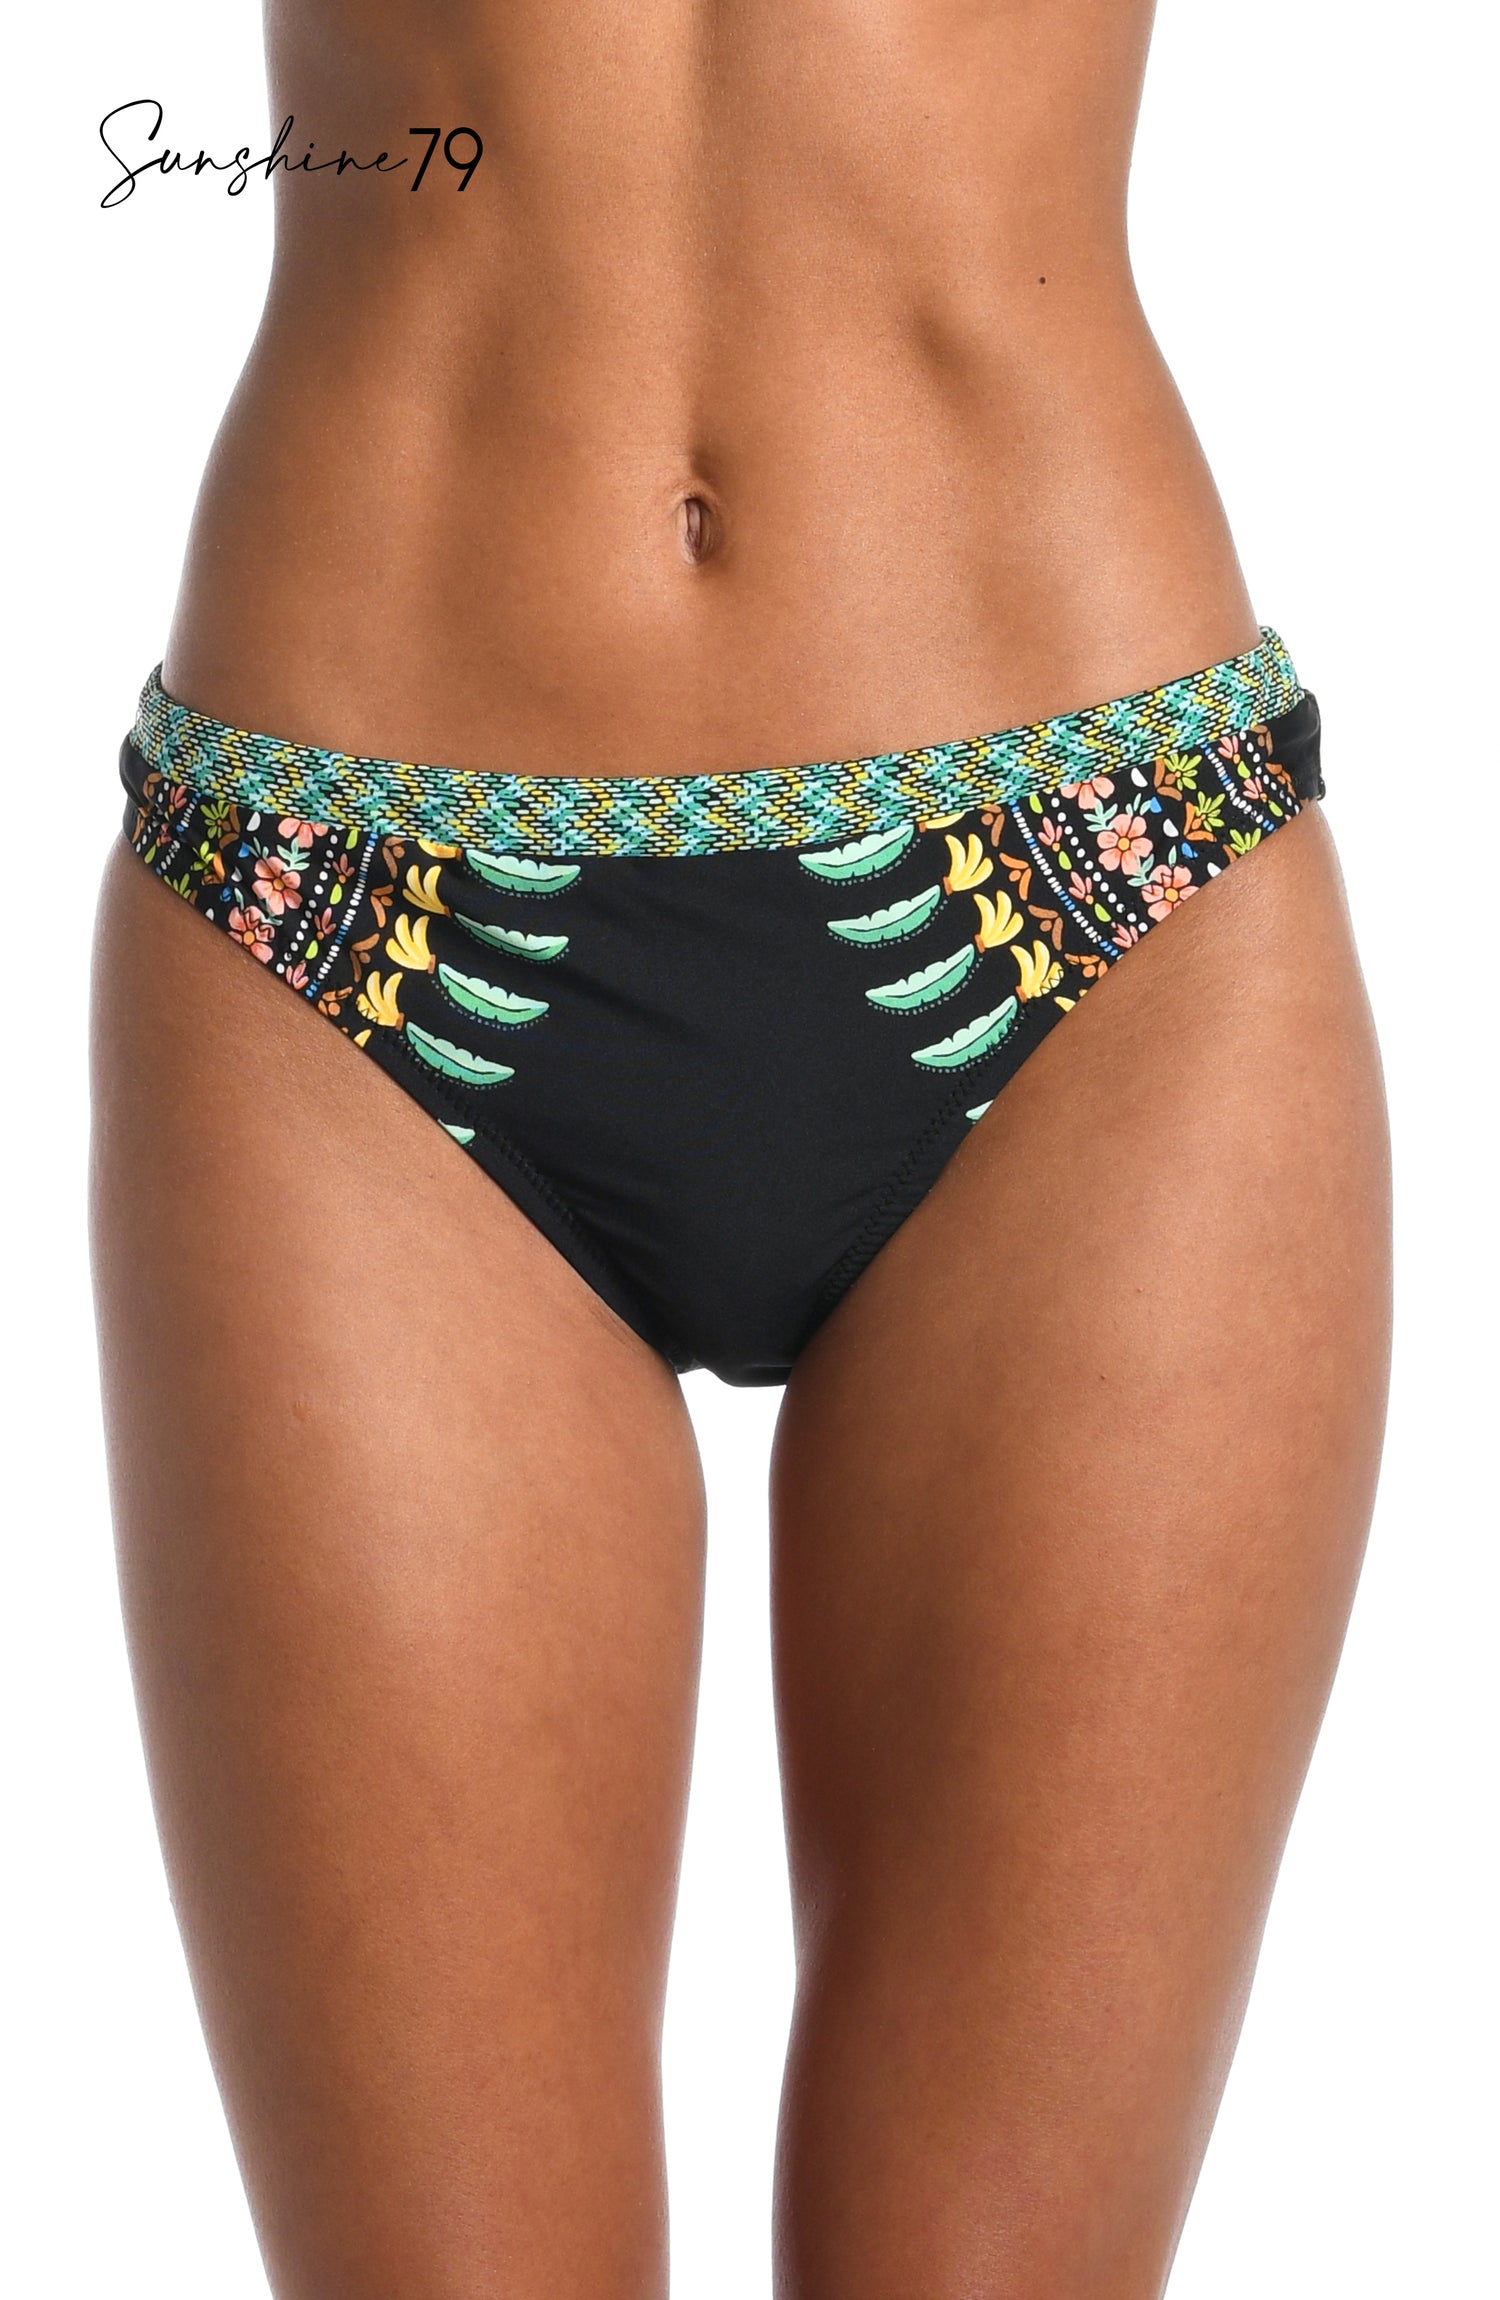 Model is wearing a black multicolored tropical palm tree printed hipster bikini bottom from our Sunshine 79 brand.